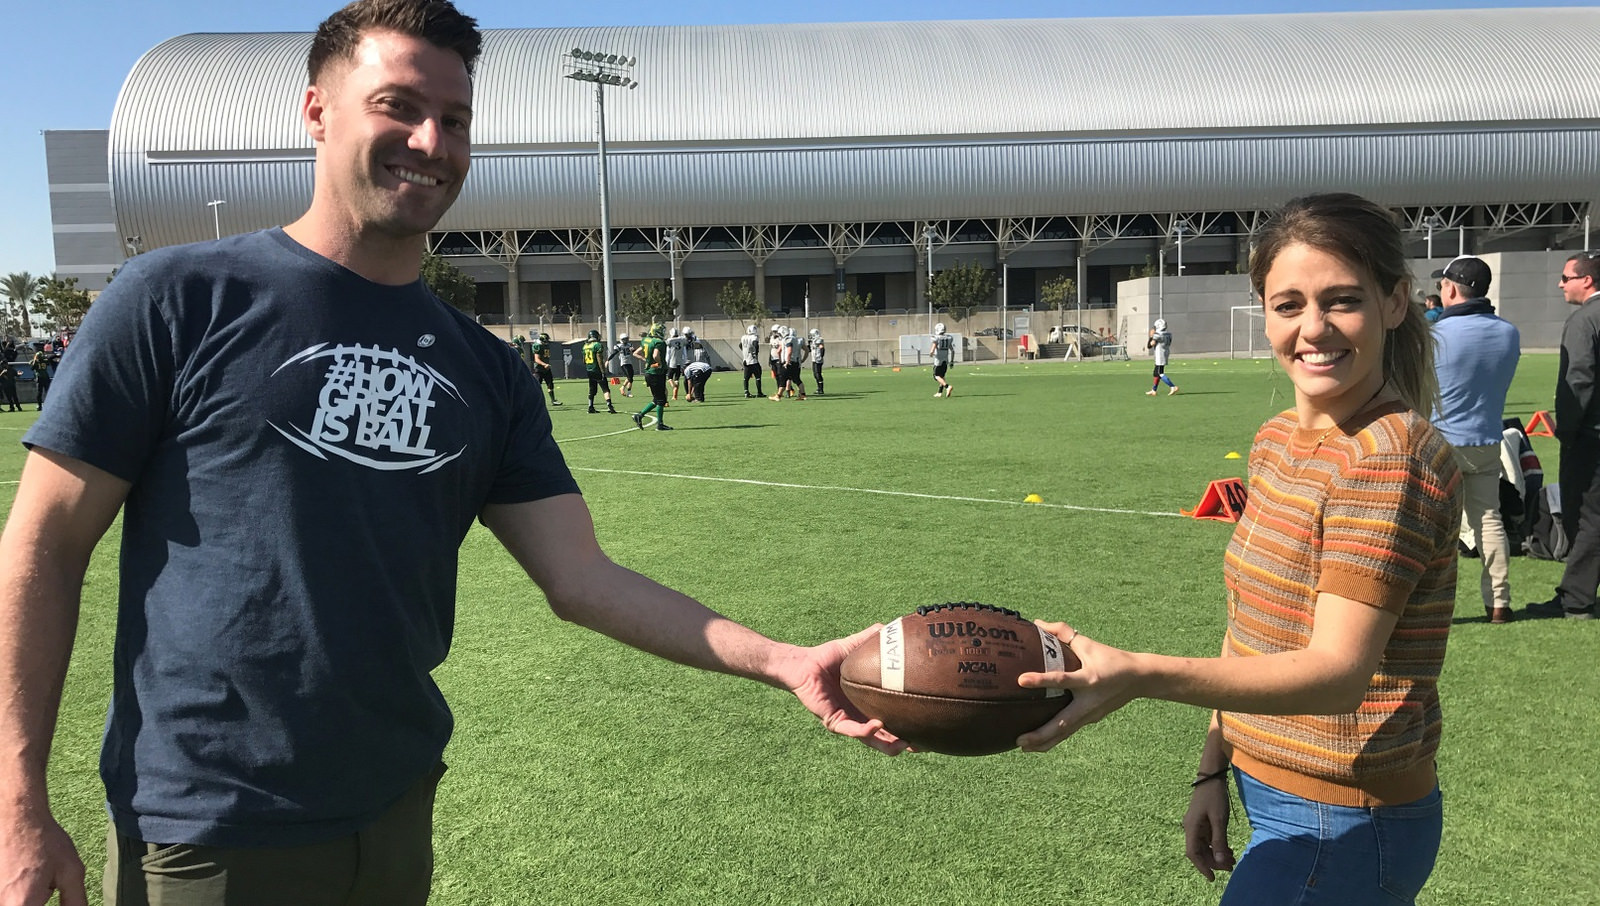 Yogi Roth and Kathy Cohen take to the football field to explore American football in Israel.